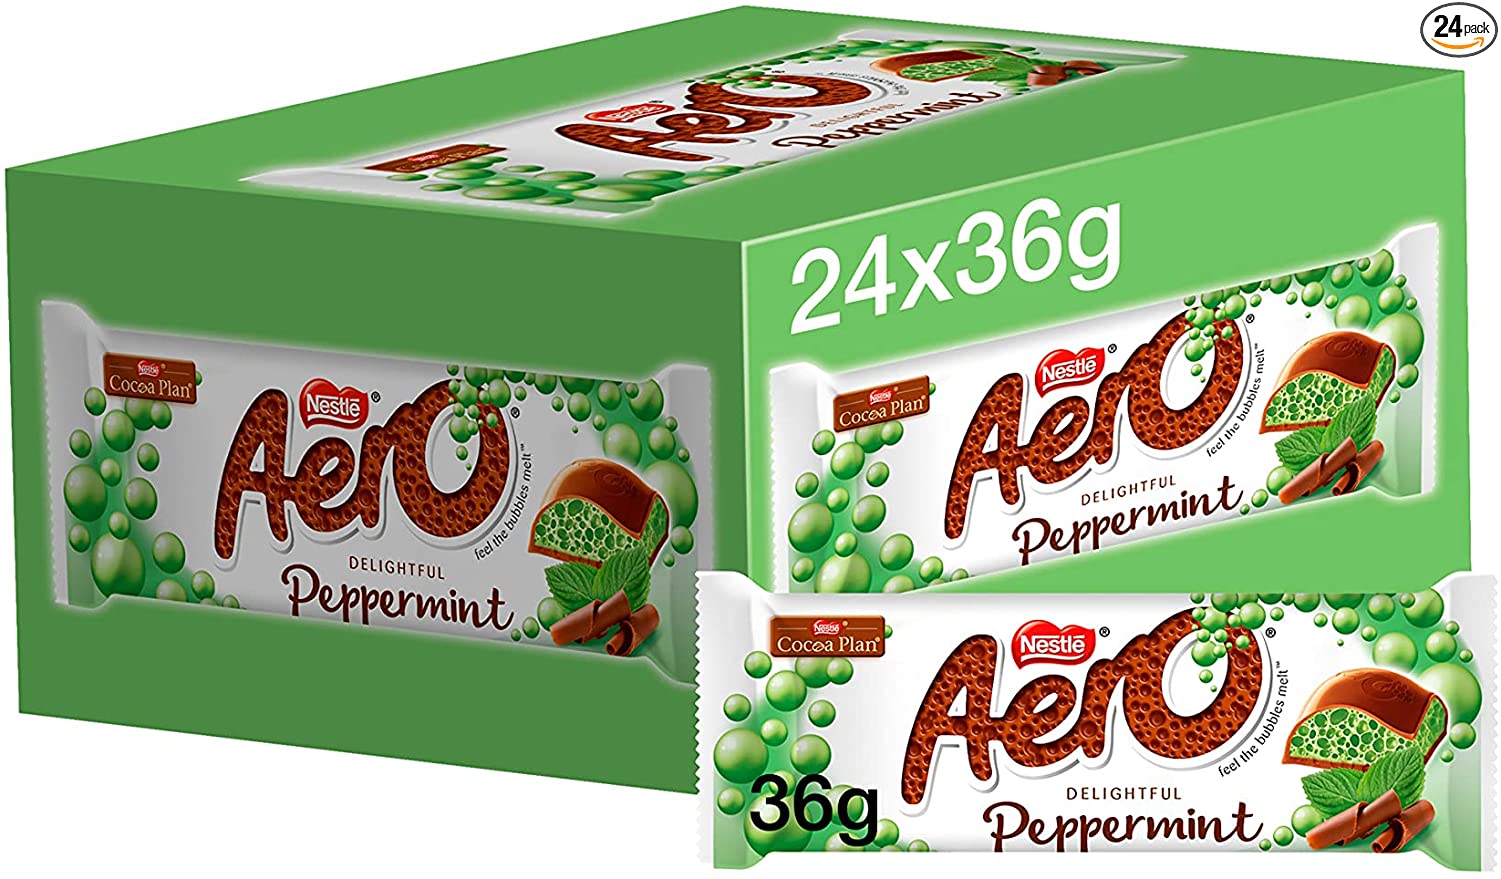 AERO - Bubbly Peppermint Chocolate Bar Multipack | 24 x 36g Mint Chocolate Bars